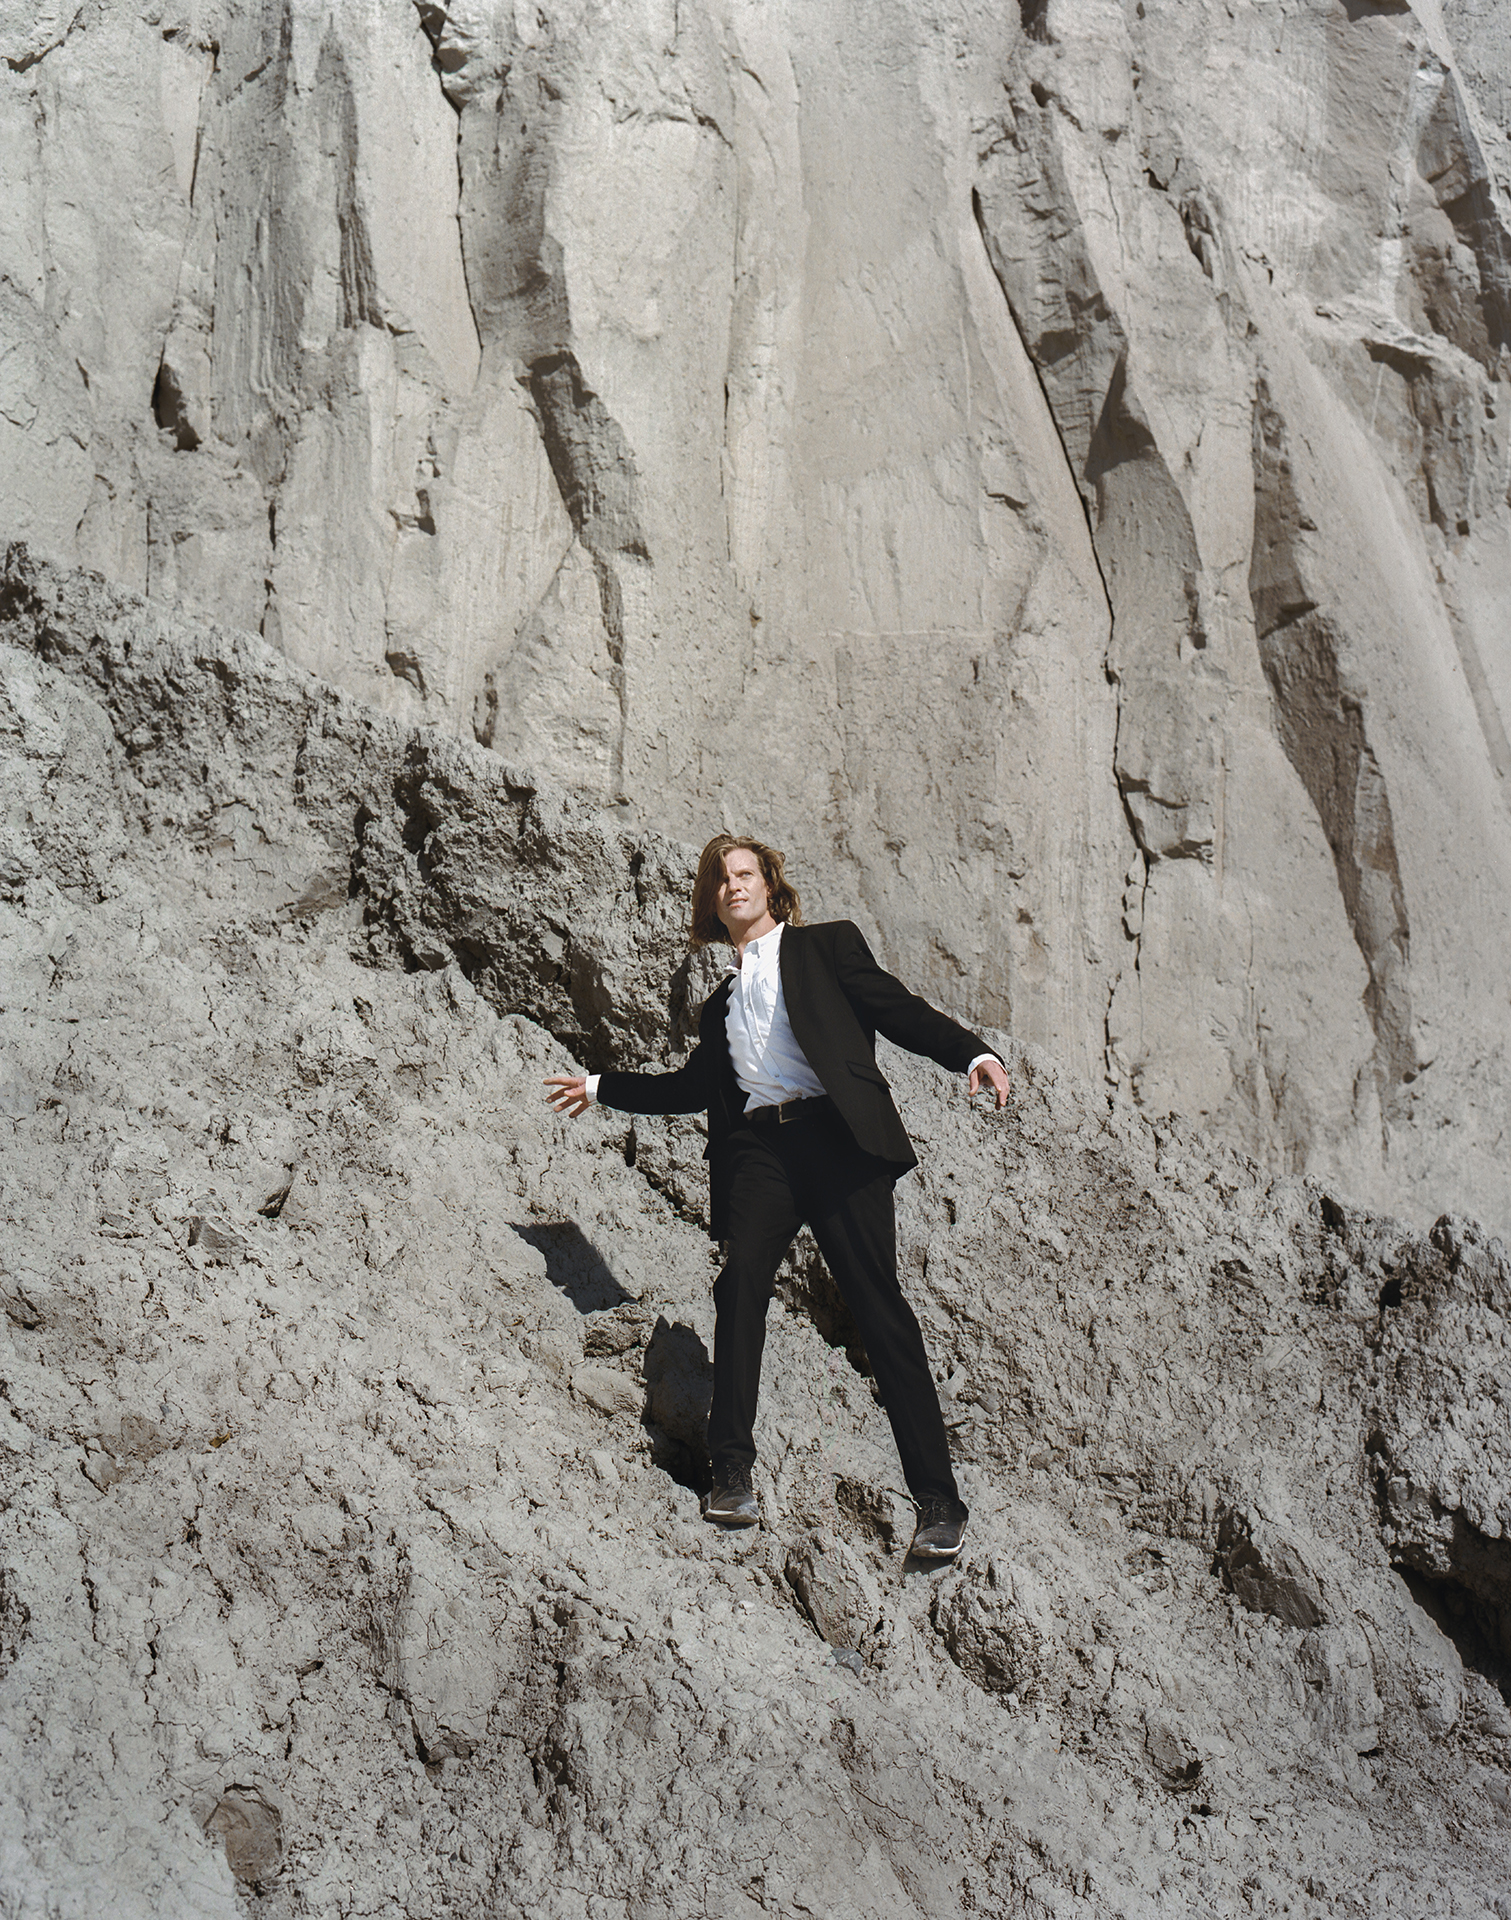 In this image, a white male can be seen wearing a black suit and white shirt on top of a cliff. His pose is awkward as he is trying to find balance as not to fall. He is surrounded with gray rocks that dominate the image.